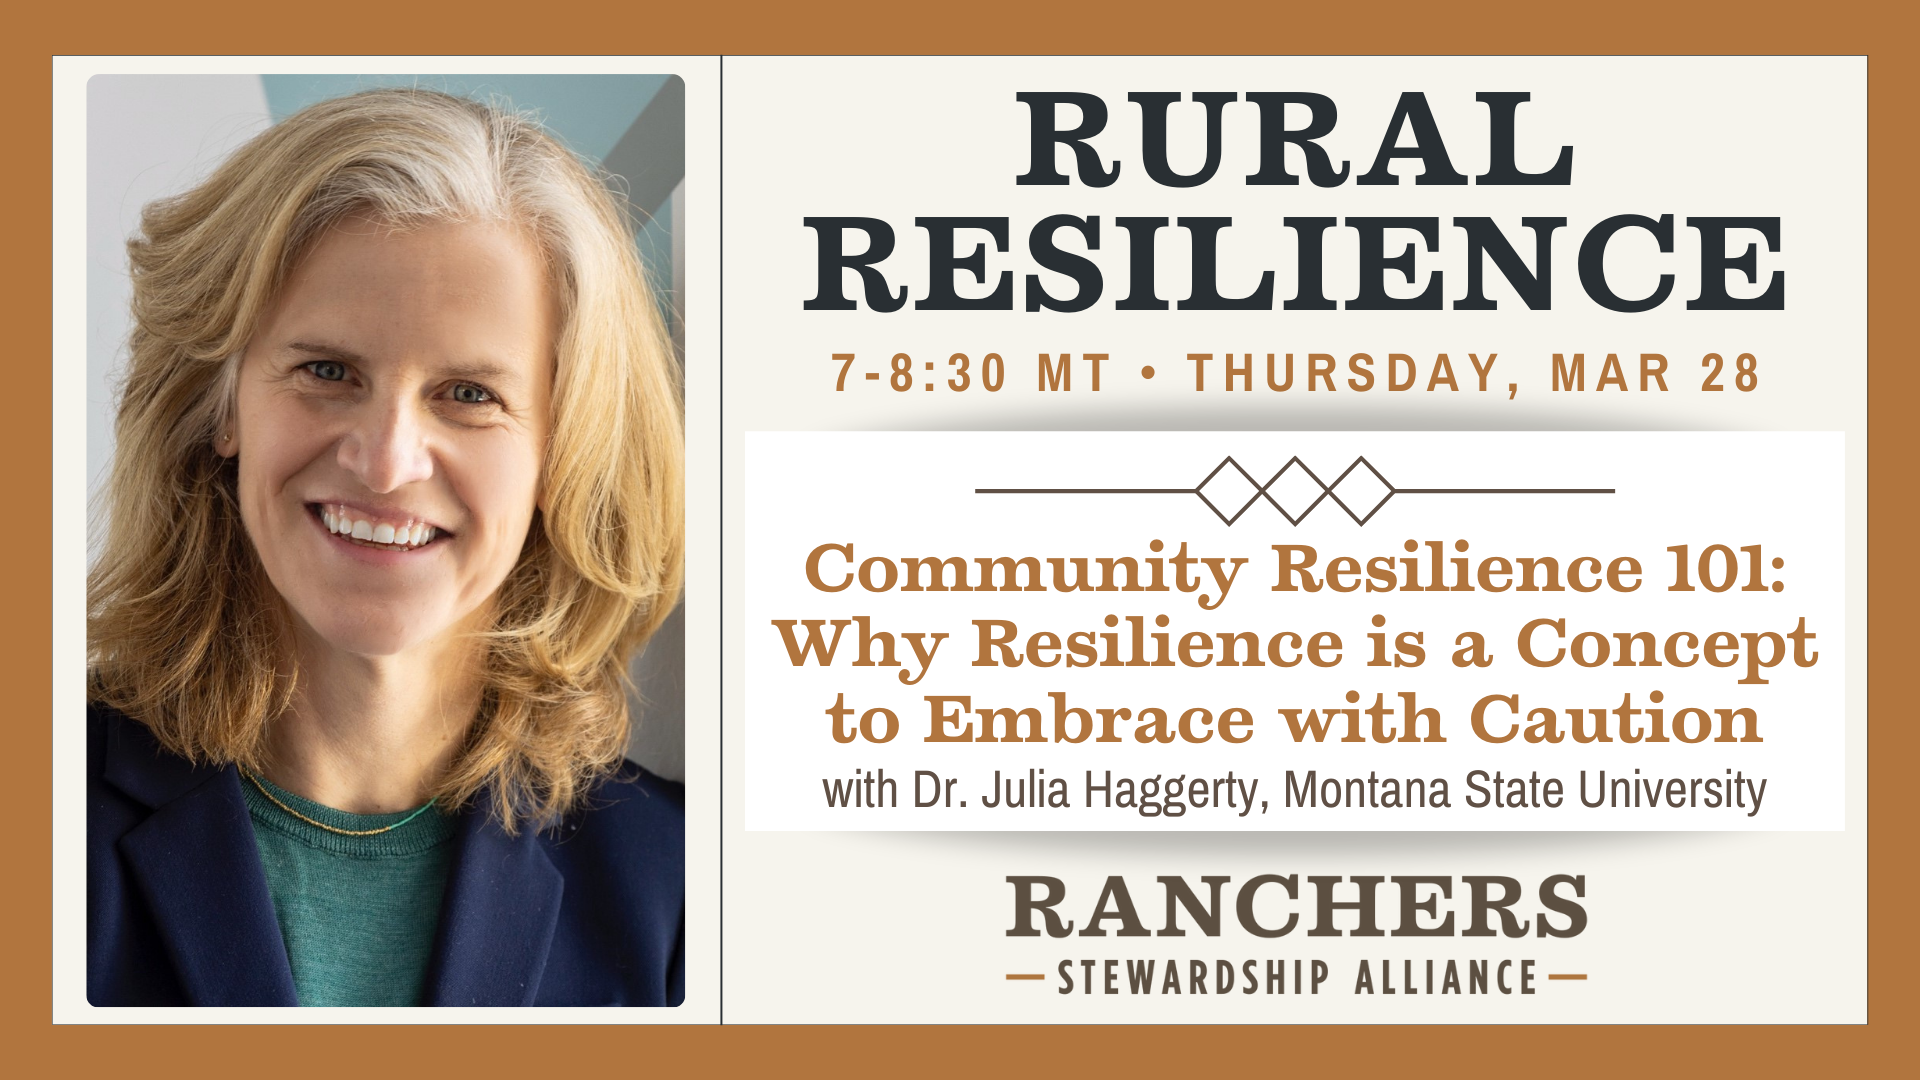 Rural Resilience • Community Resilience 101: Why Resilience is a Concept to Embrace with Caution